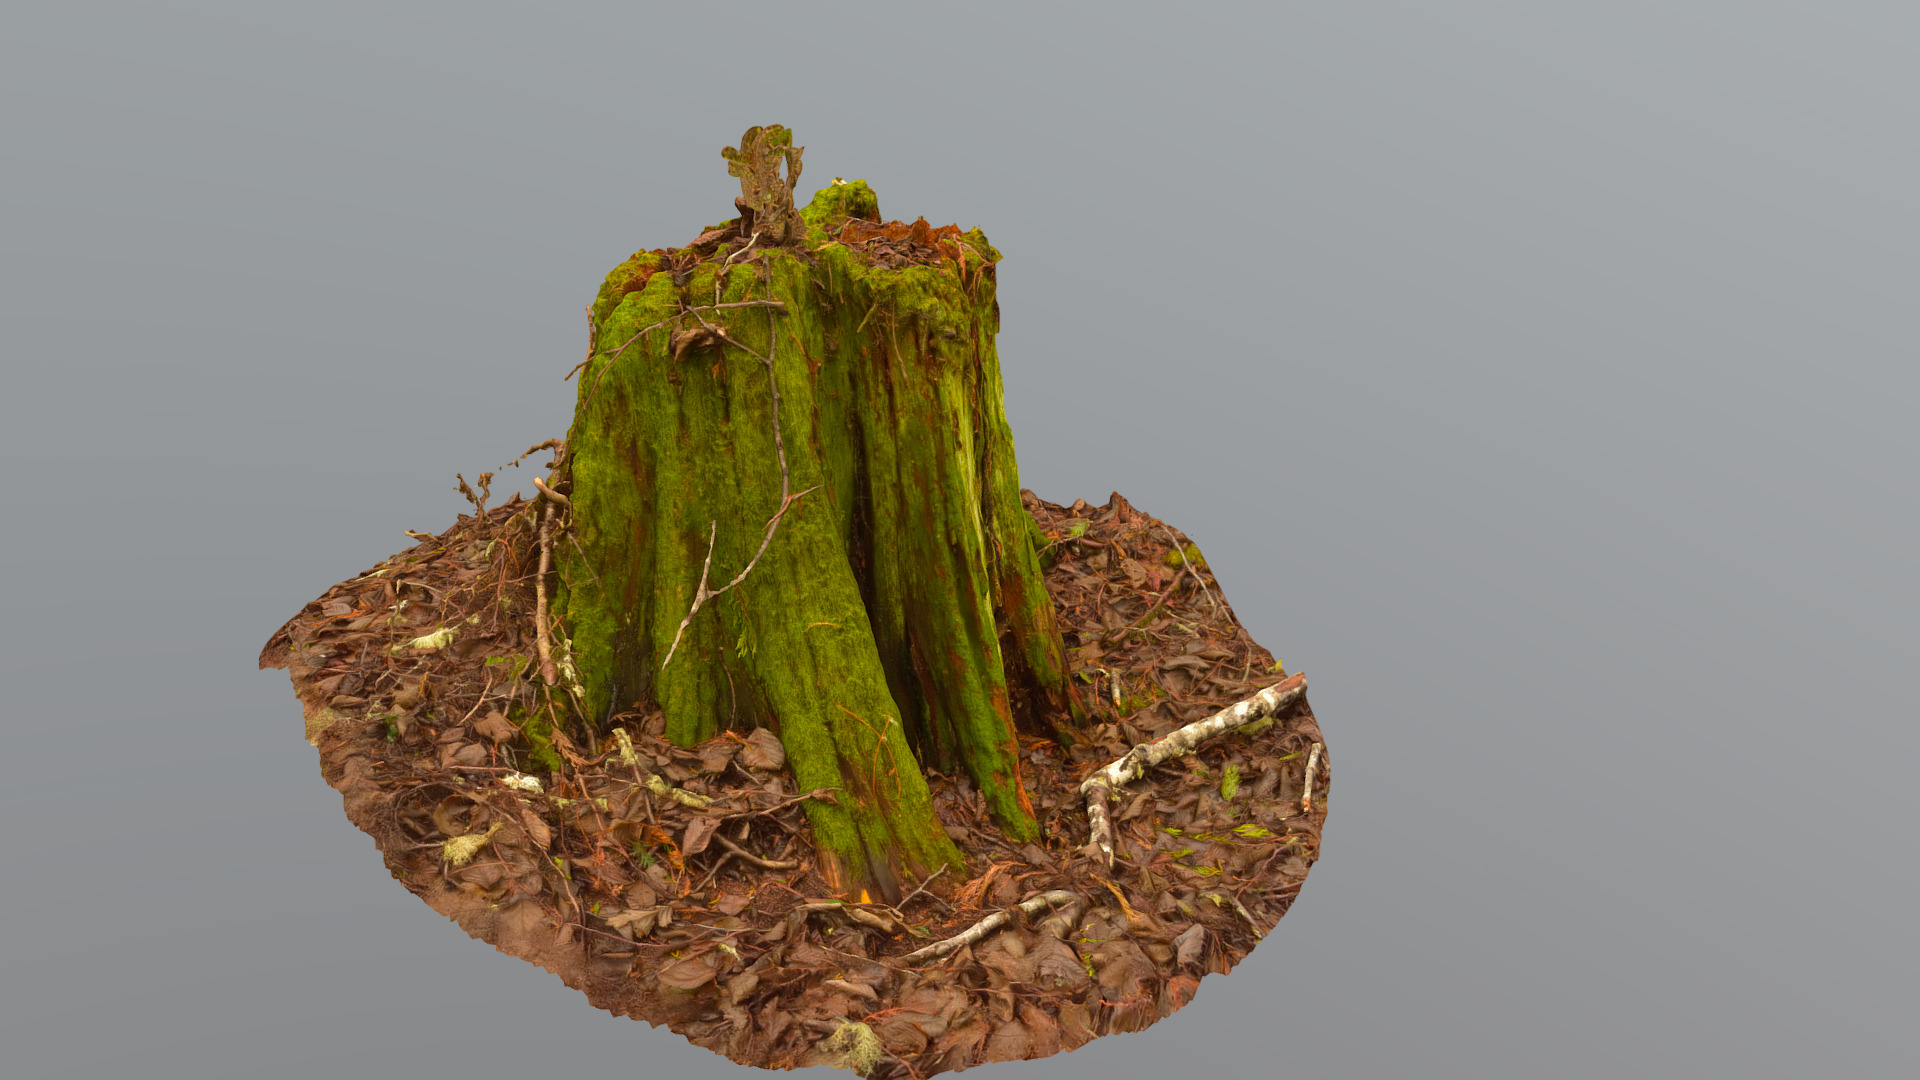 3D model Mossy Stump 7 - This is a 3D model of the Mossy Stump 7. The 3D model is about a mossy tree stump.